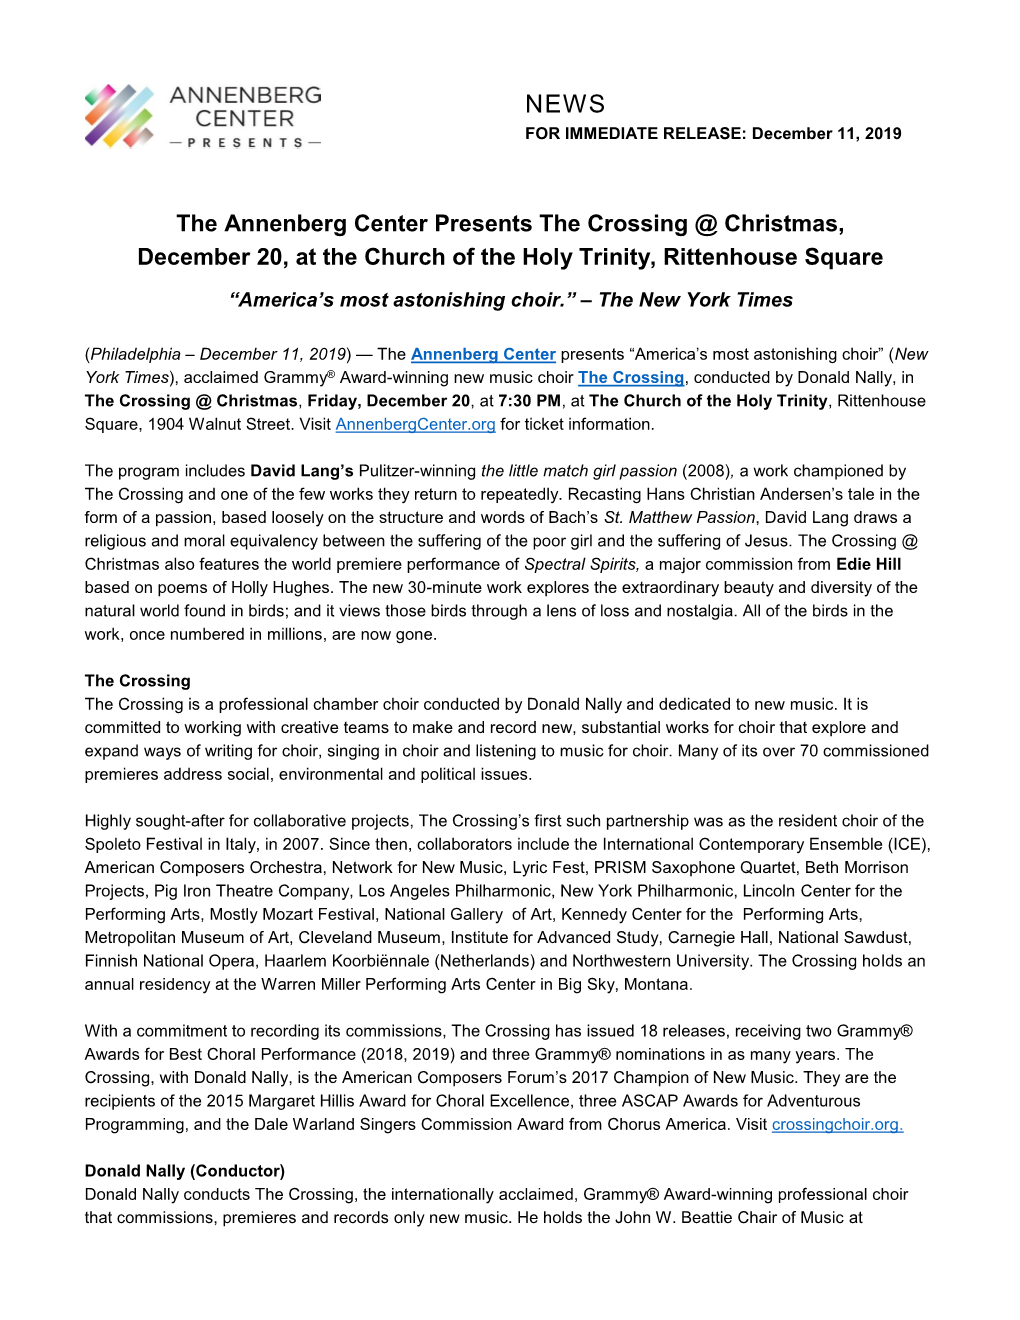 The Annenberg Center Presents the Crossing @ Christmas, December 20, at the Church of the Holy Trinity, Rittenhouse Square